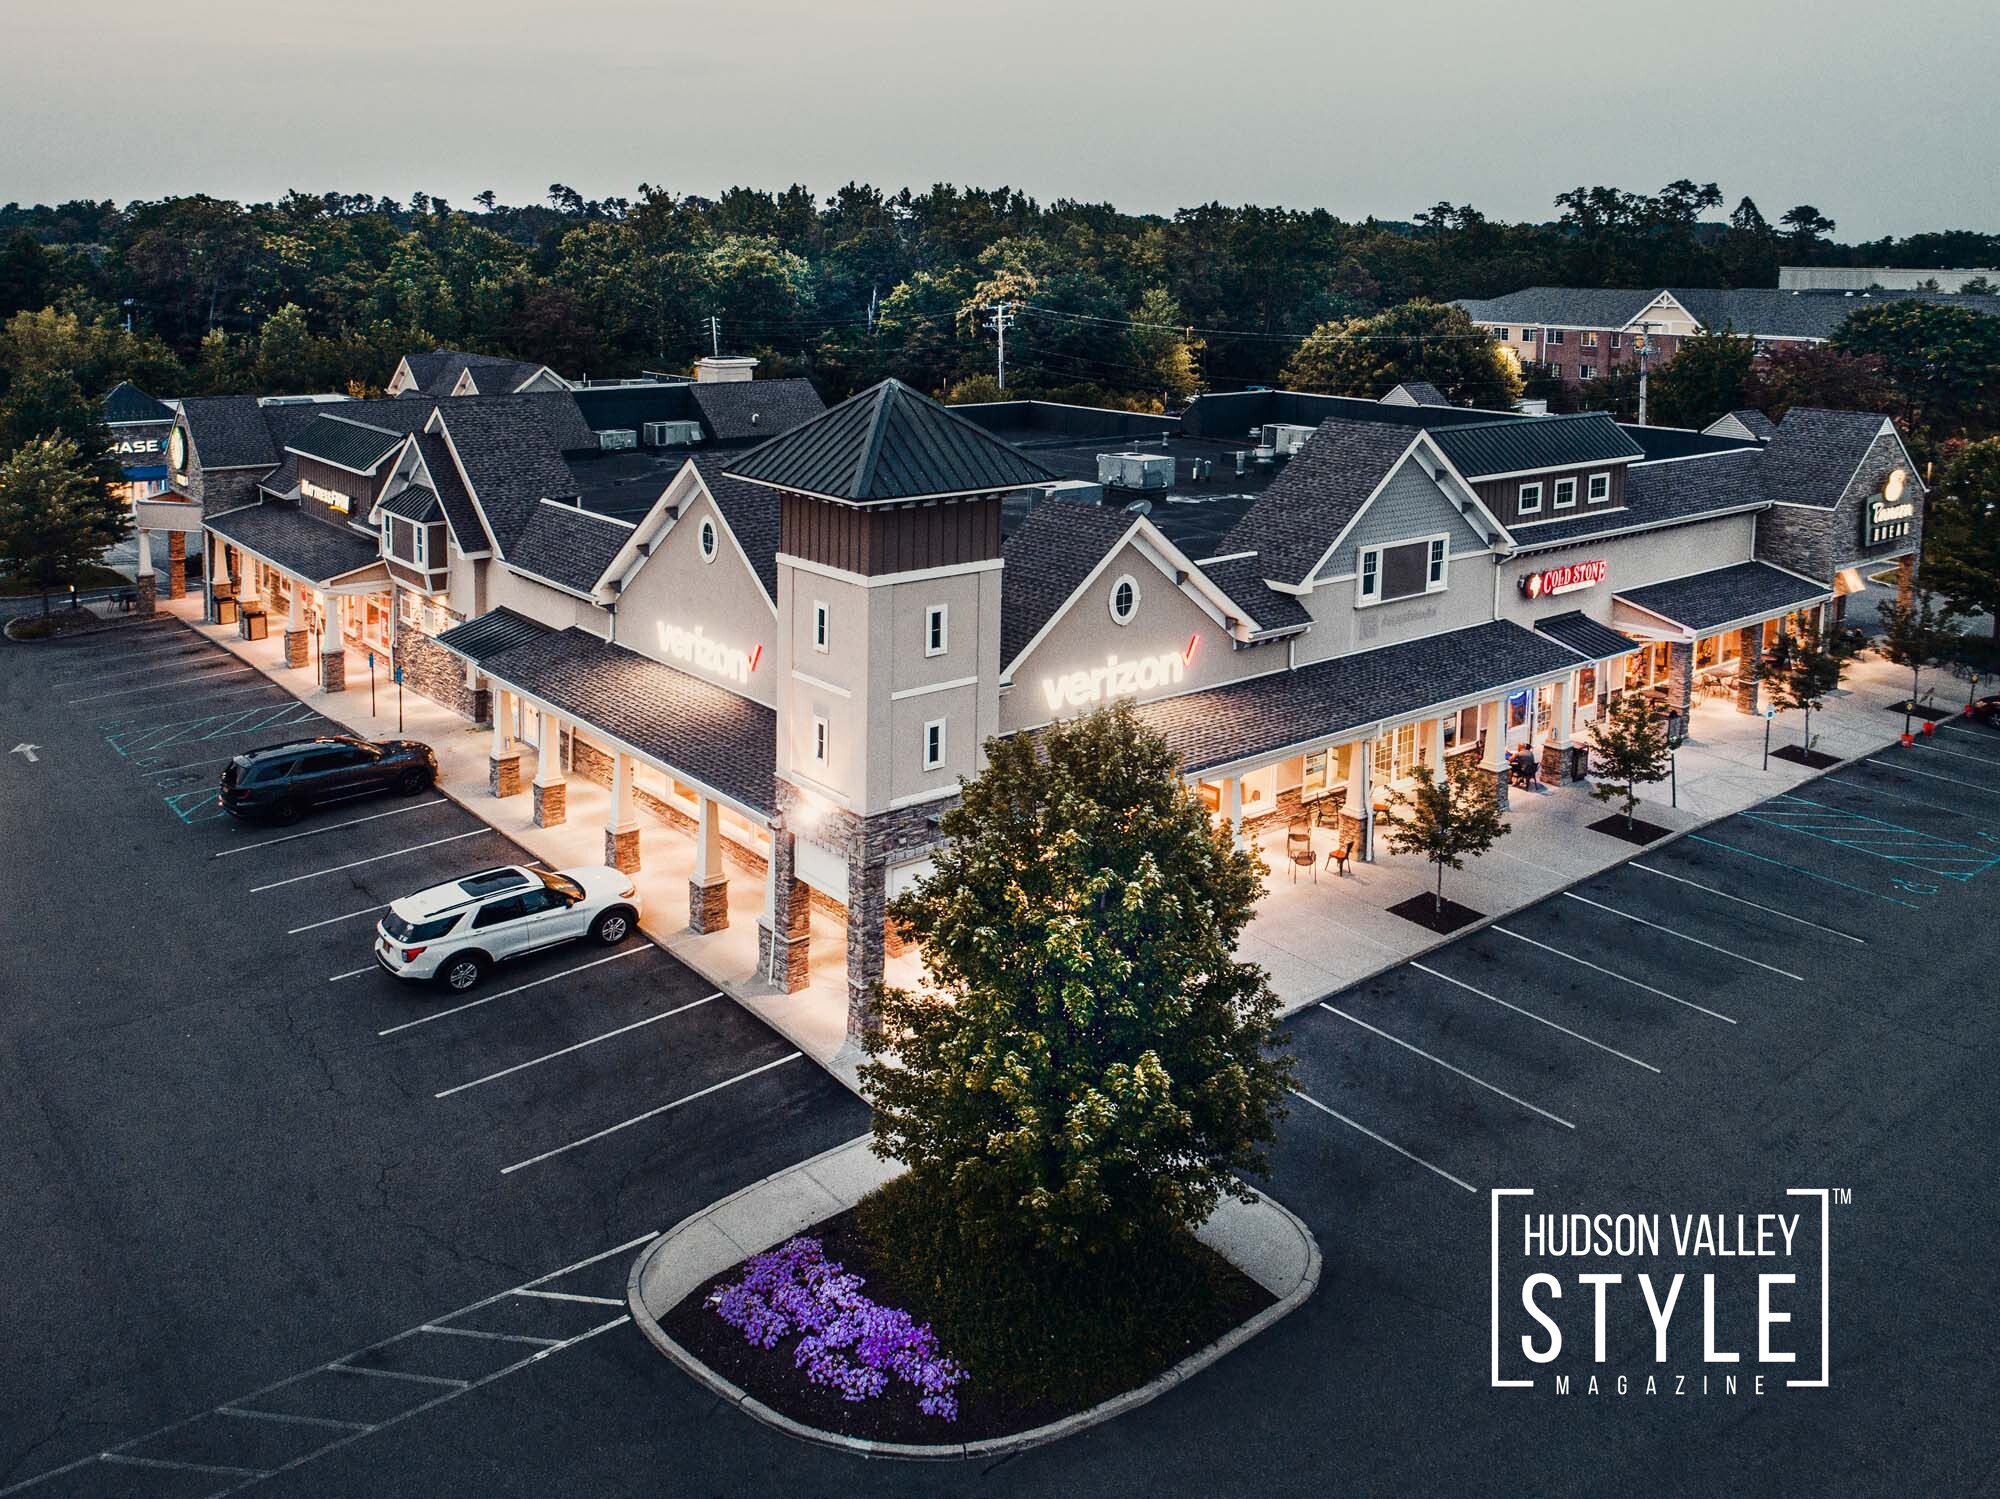 Commercial Real Estate Photography Project in Fishkill, NY - Twilight Photography - Aerial Drone Photography - HDR Photography - Duncan Avenue Studios, New York - Hudson Valley